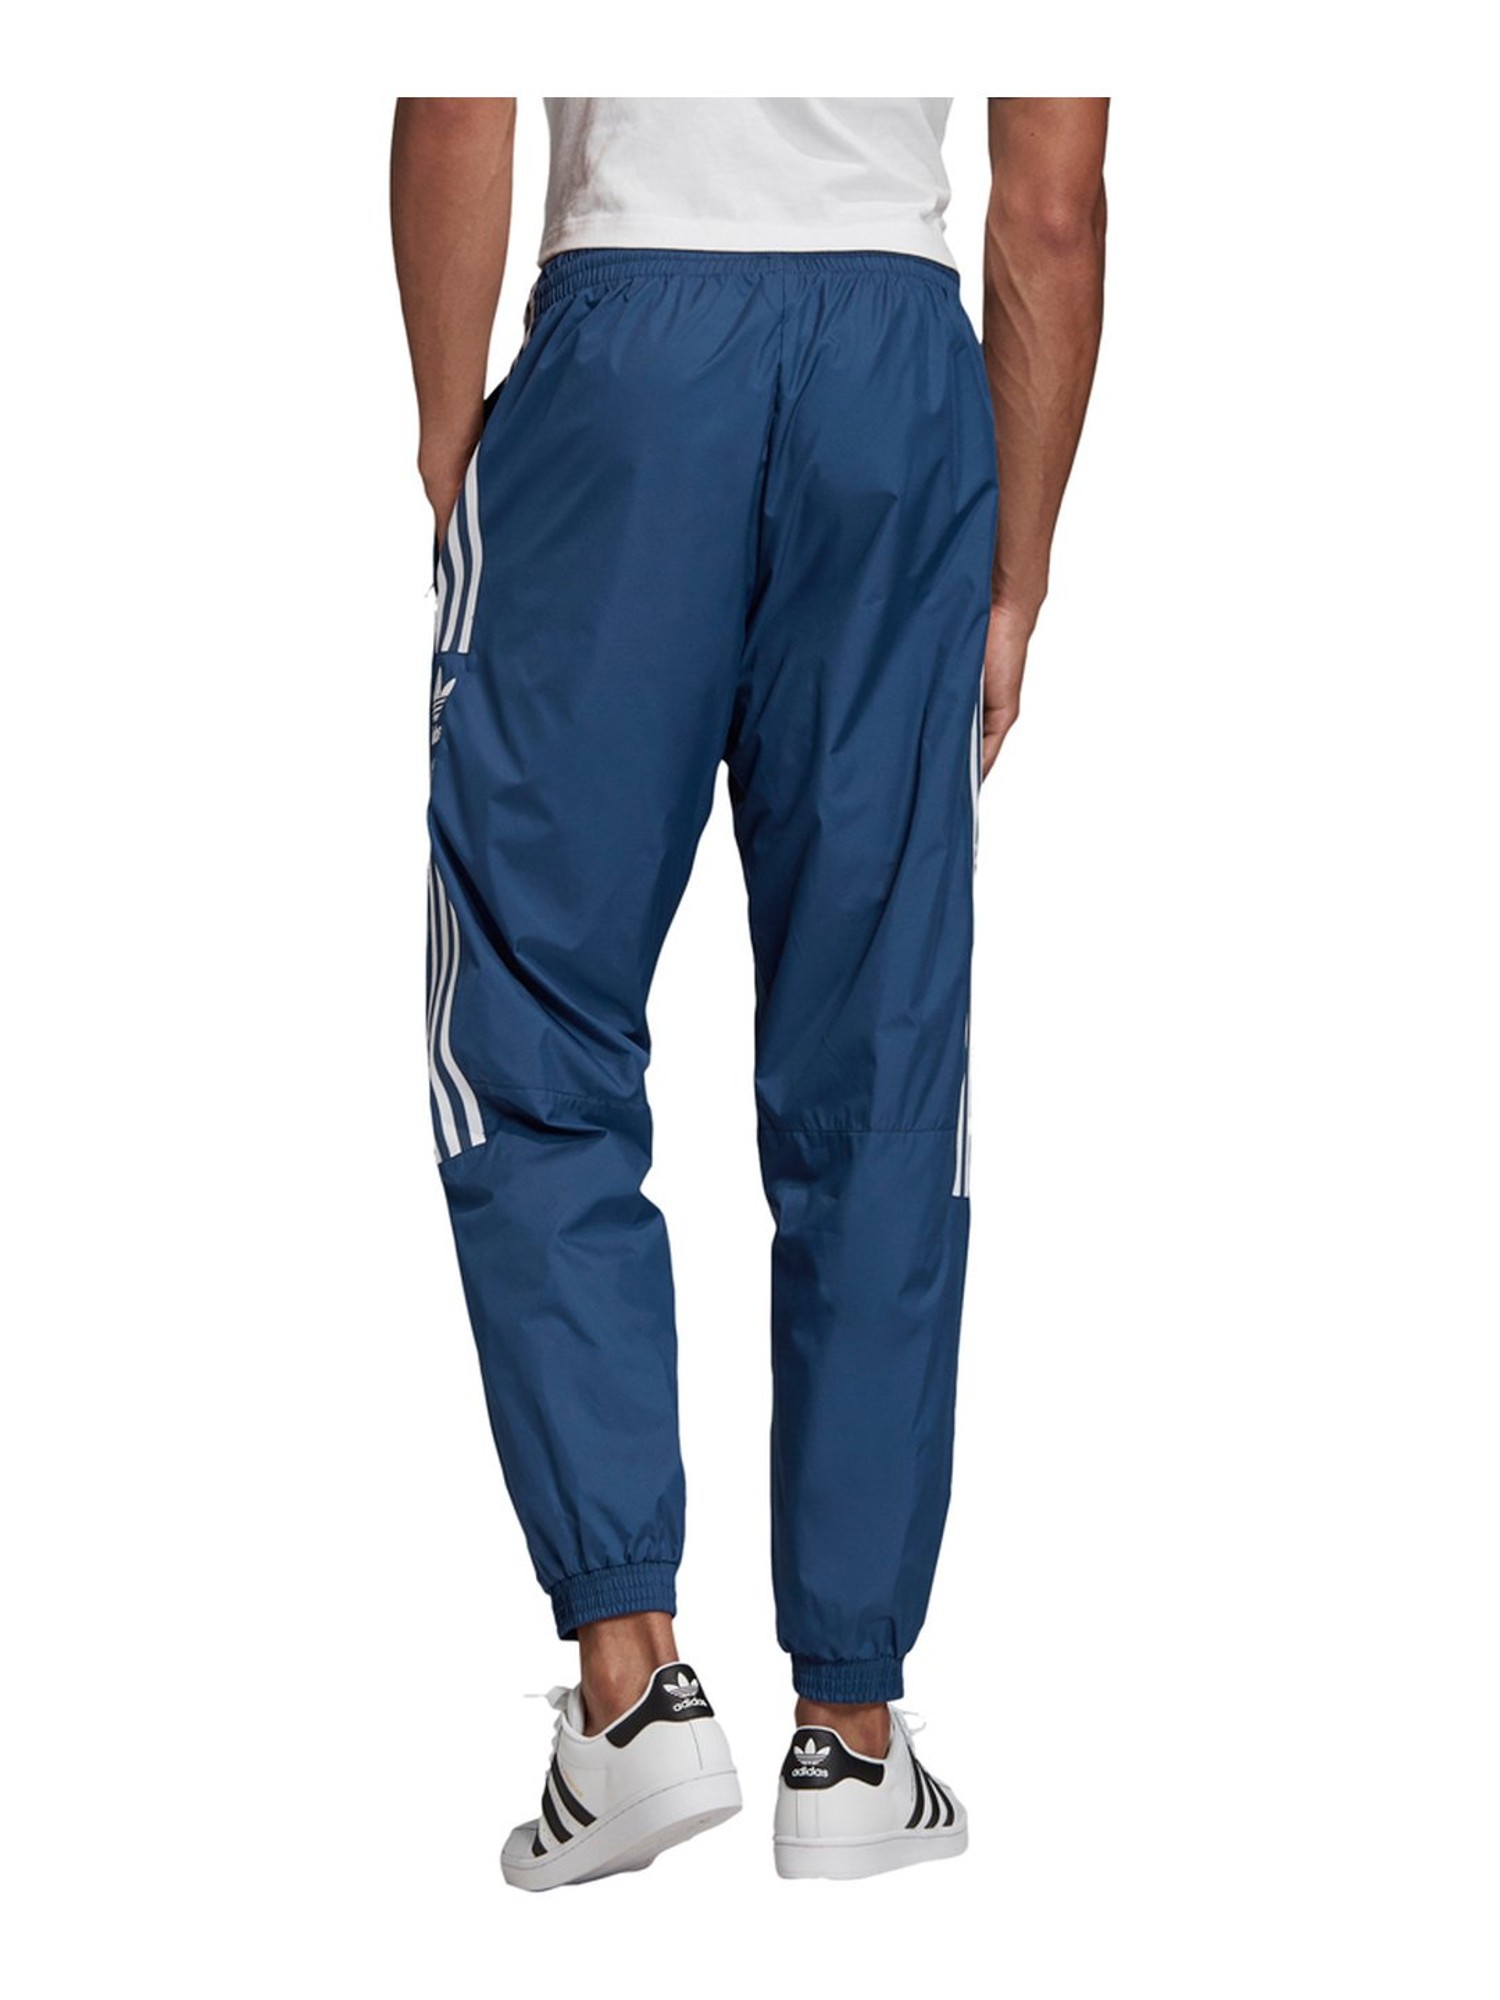 Adidas Mens Regular Fit Cotton Trackpants GH7305Black WhiteS   Amazonin Clothing  Accessories